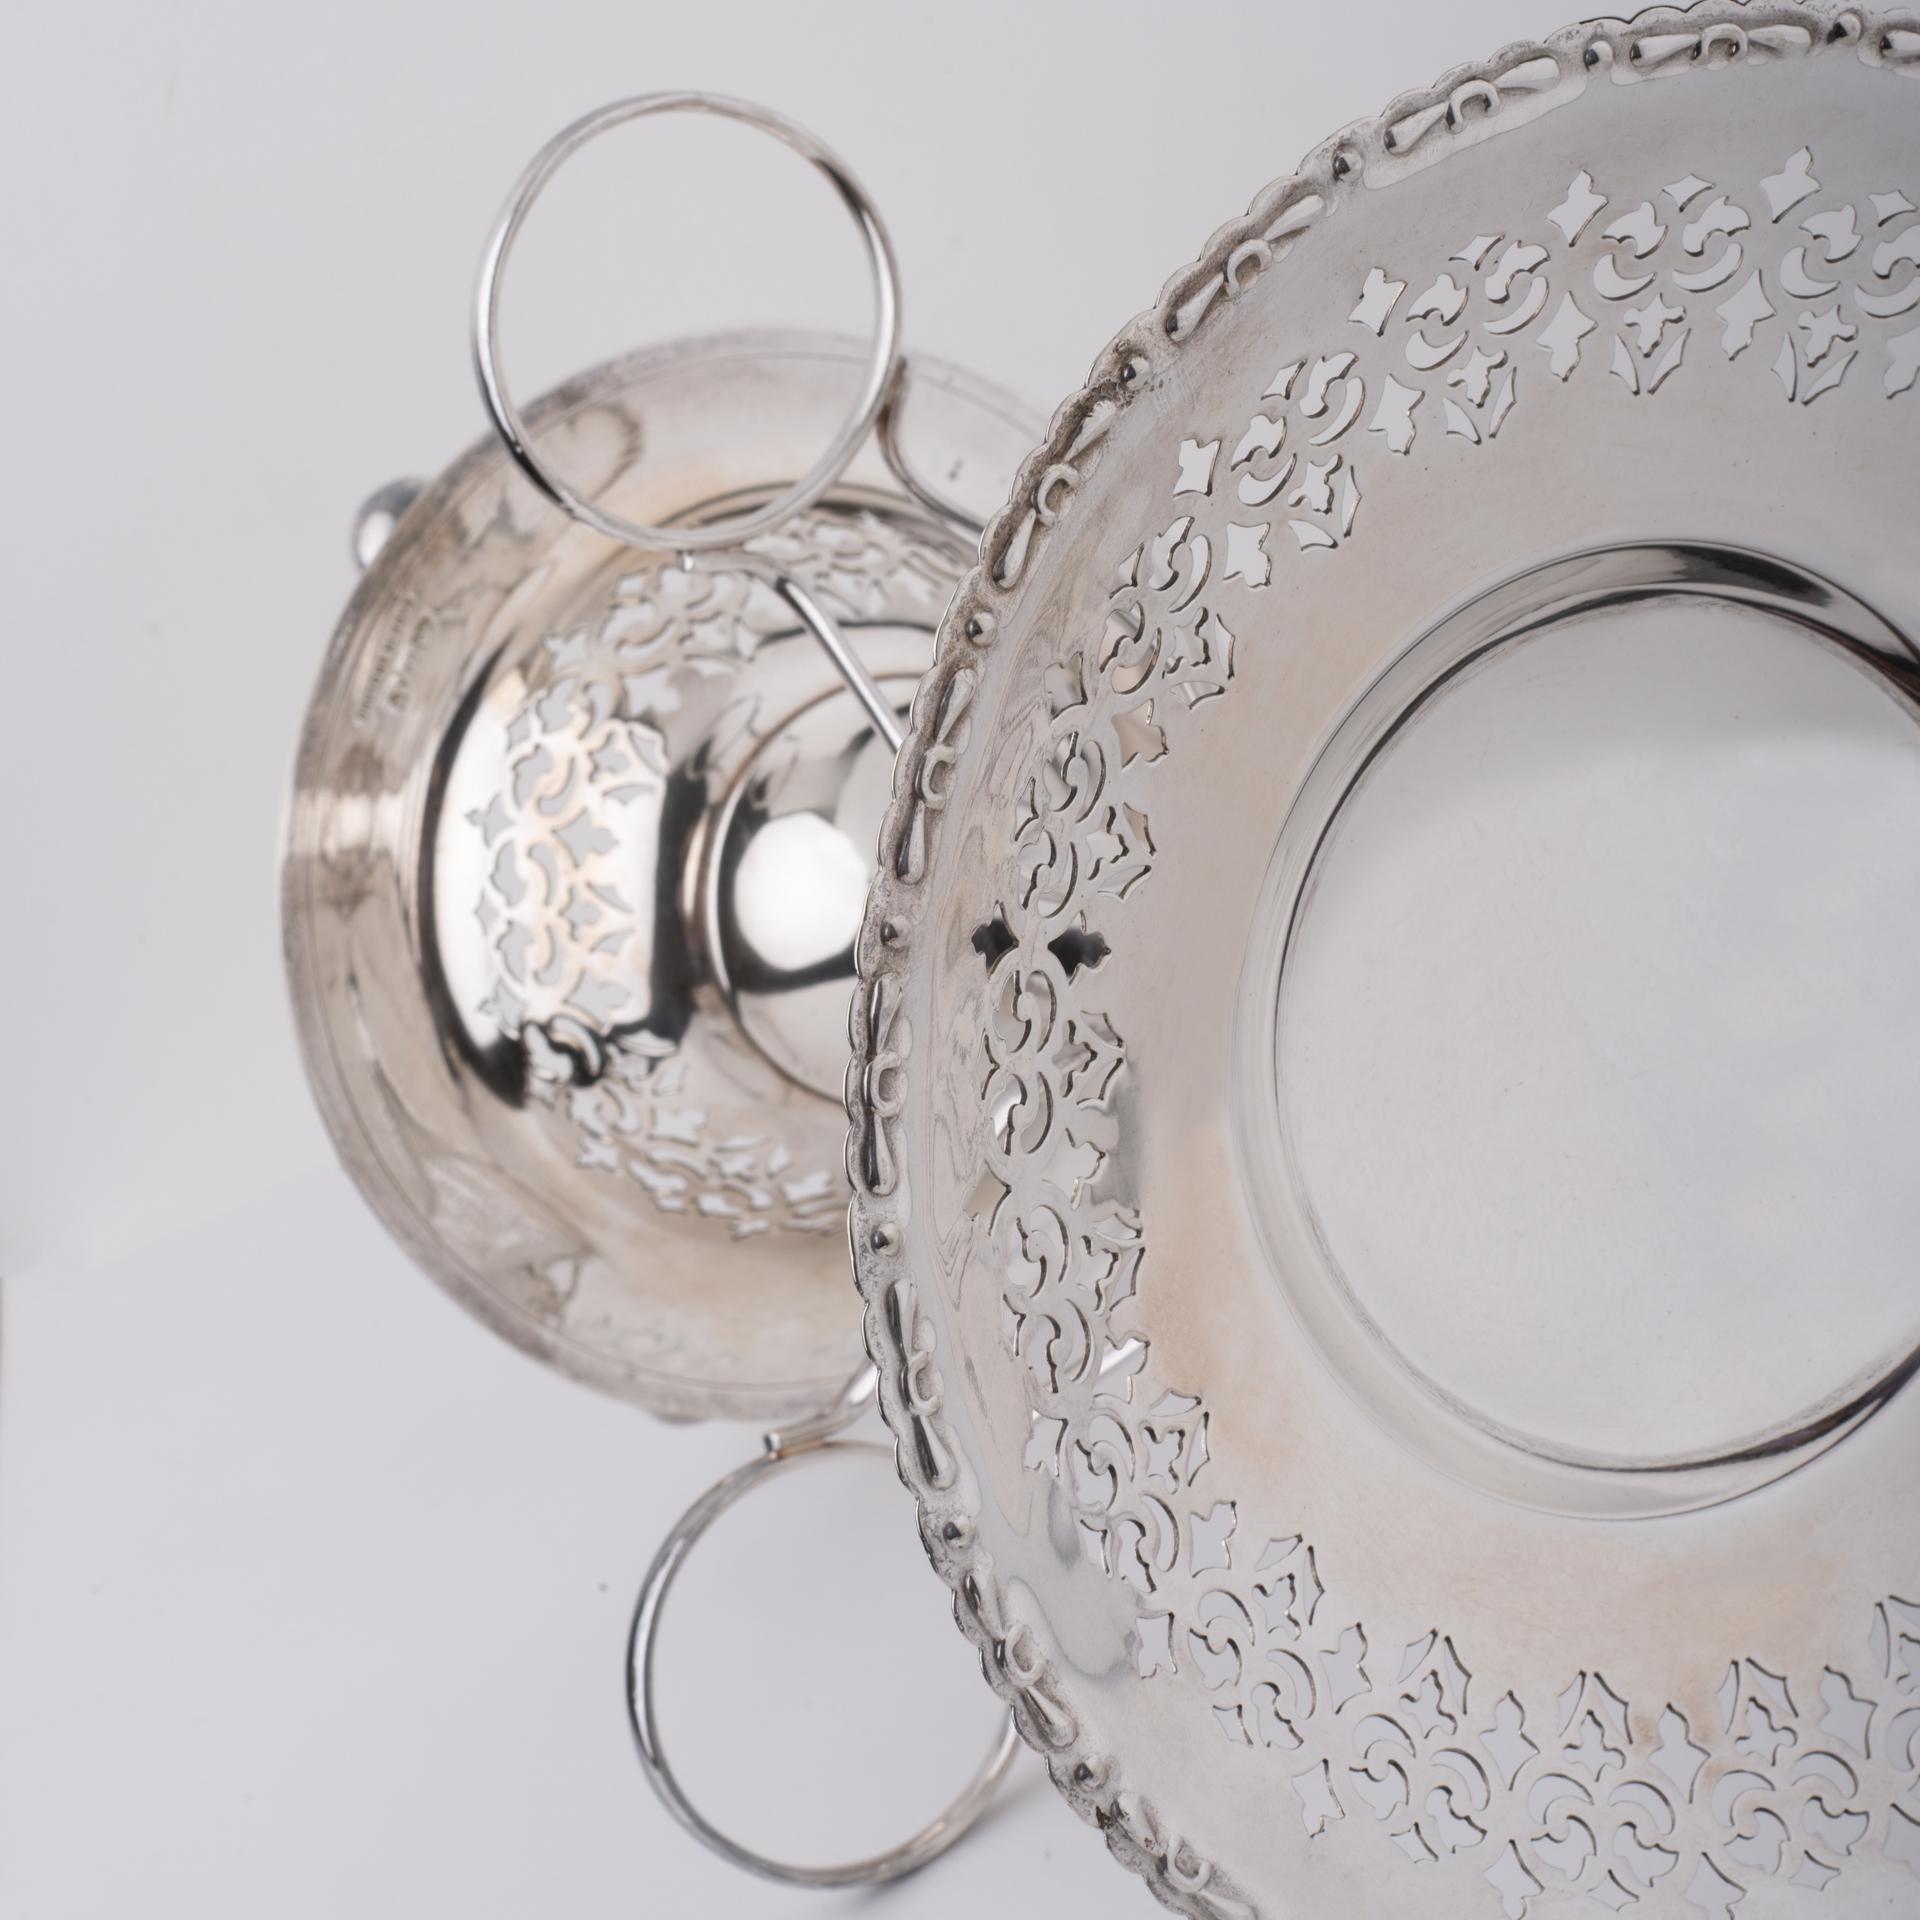 English Antique Silver Plate Epergne  In Excellent Condition For Sale In Alessandria, Piemonte